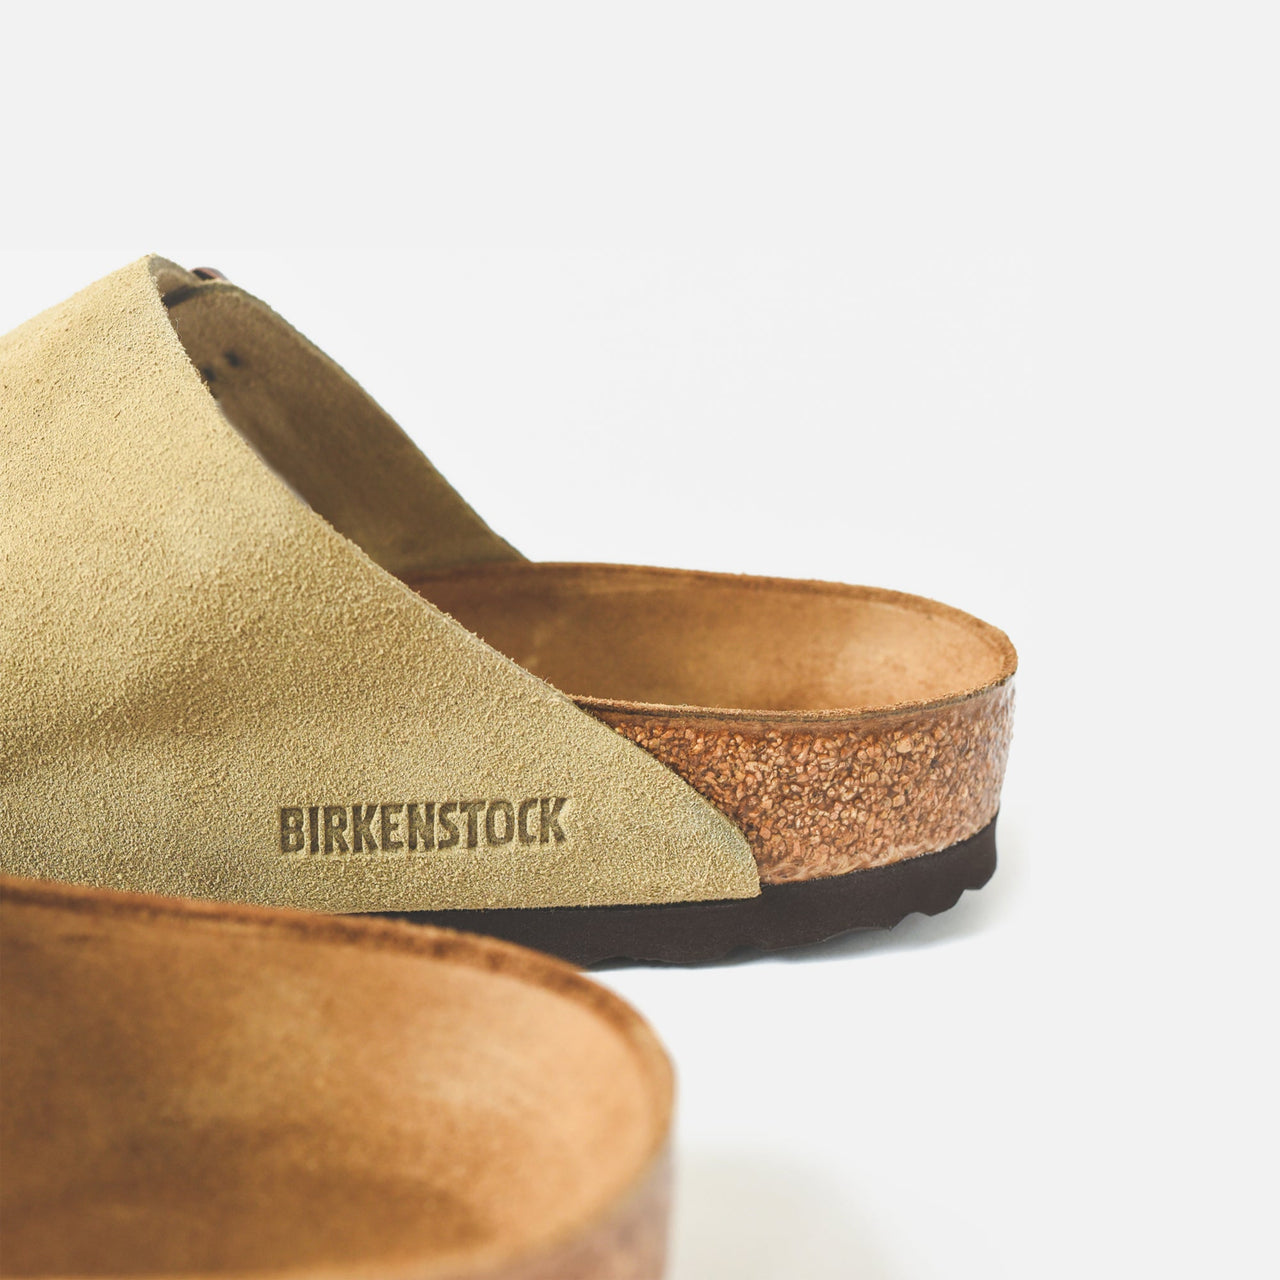 A close-up image of Birkenstock Women's Arizona Suede Taupe sandals with adjustable straps and a comfortable footbed